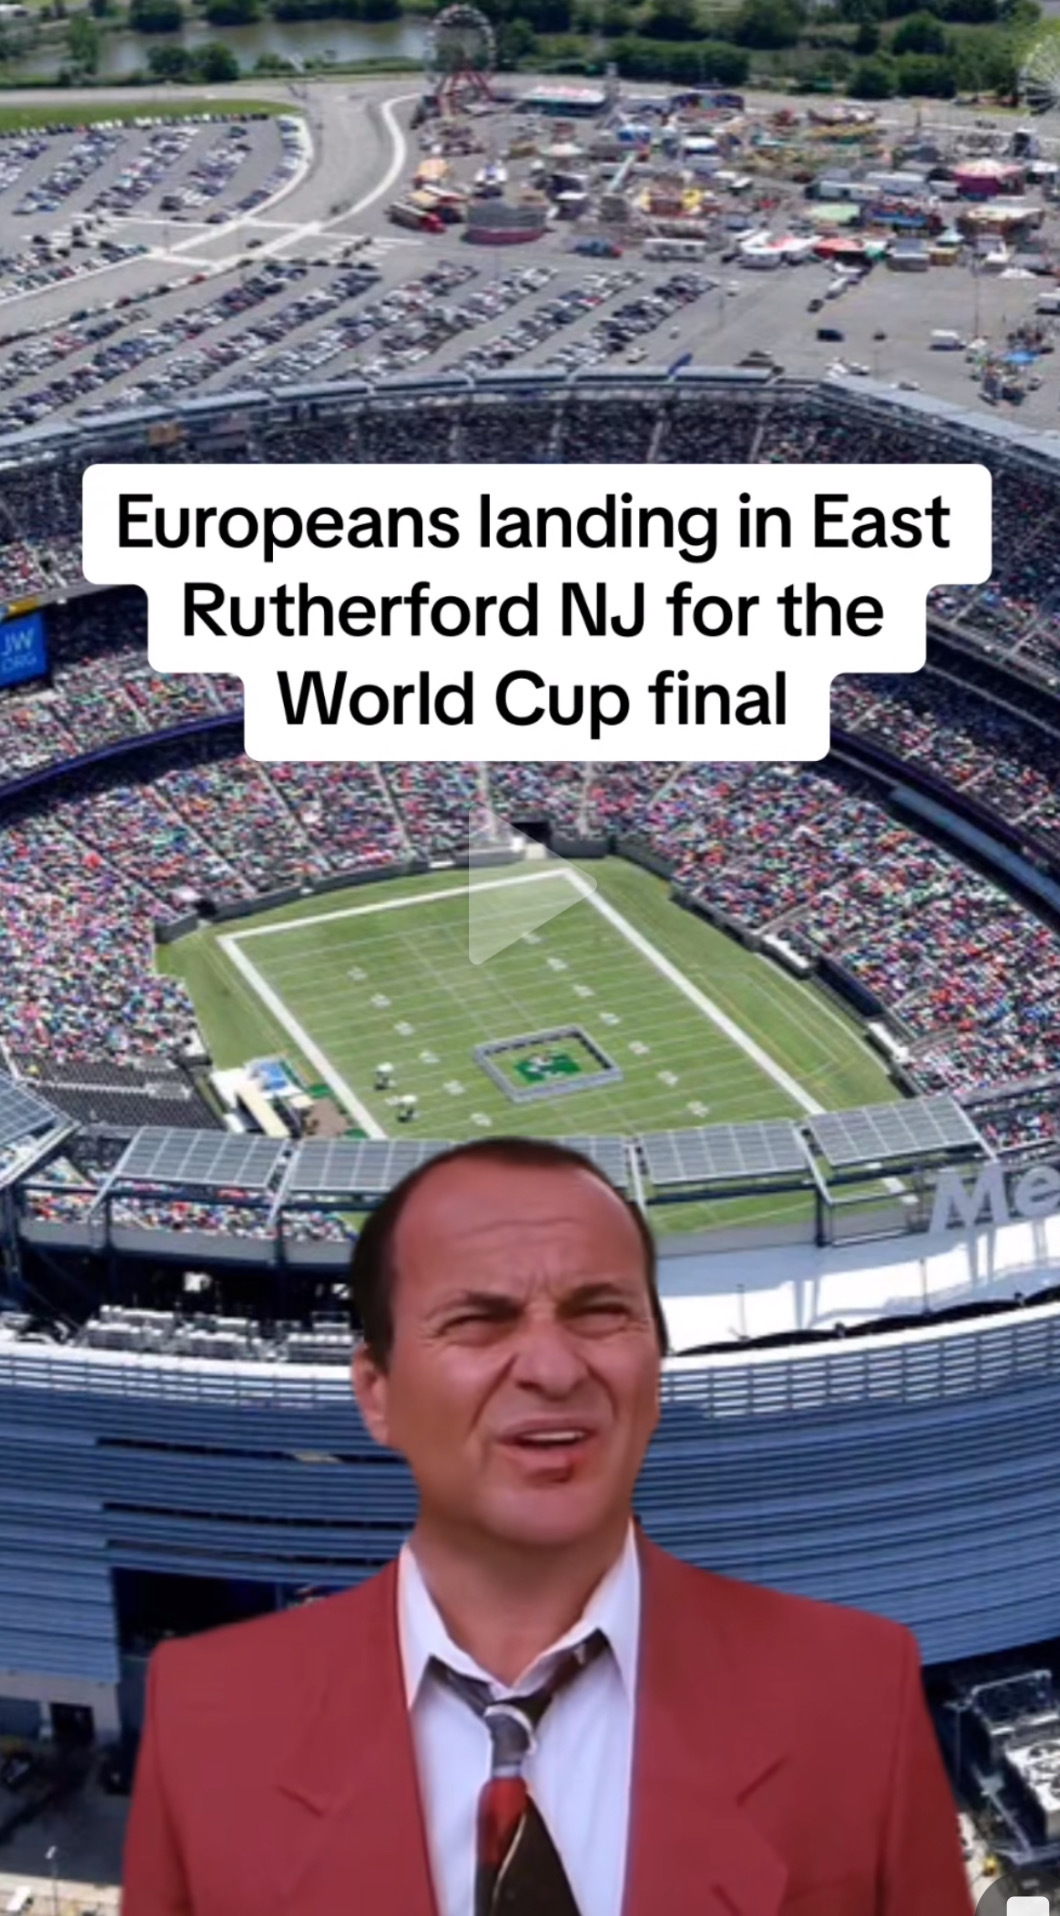 stadium - Beta Europeans landing in East Rutherford Nj for the World Cup final